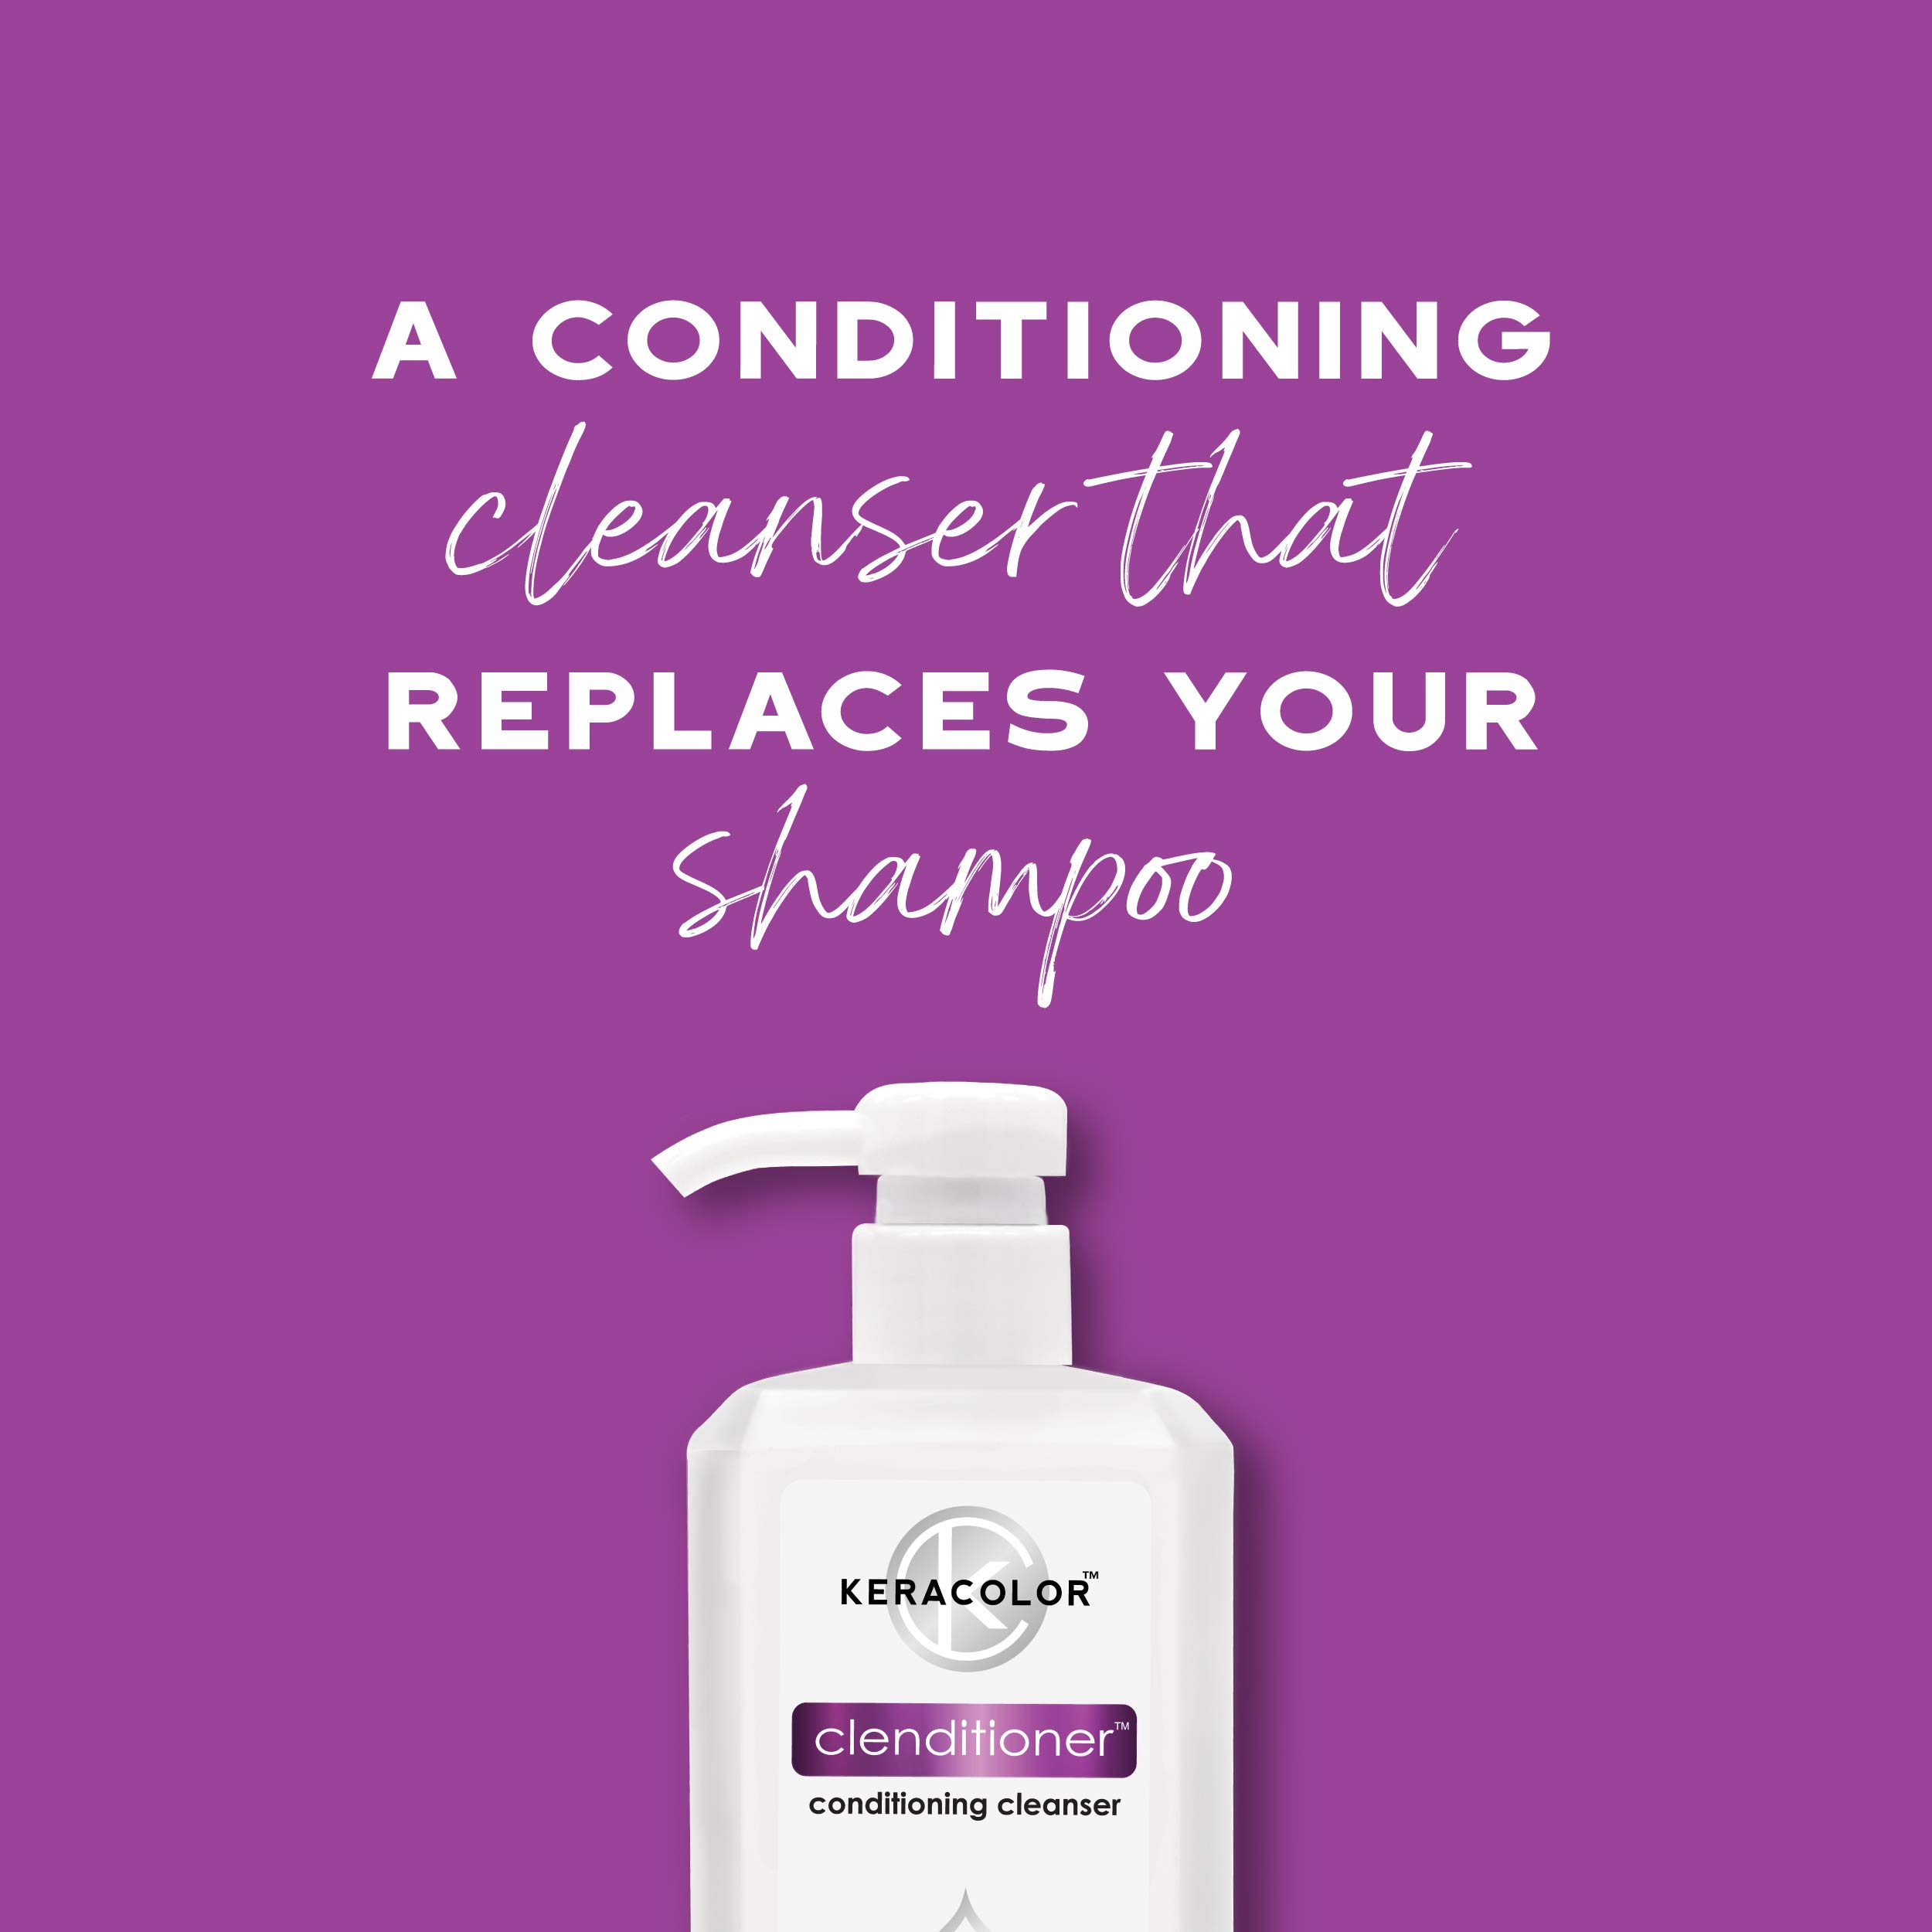 Keracolor Clenditioner Cleansing Conditioner Color Safe Prevents Fade - Replaces Your Shampoo, Keratin Infused (2 sizes)